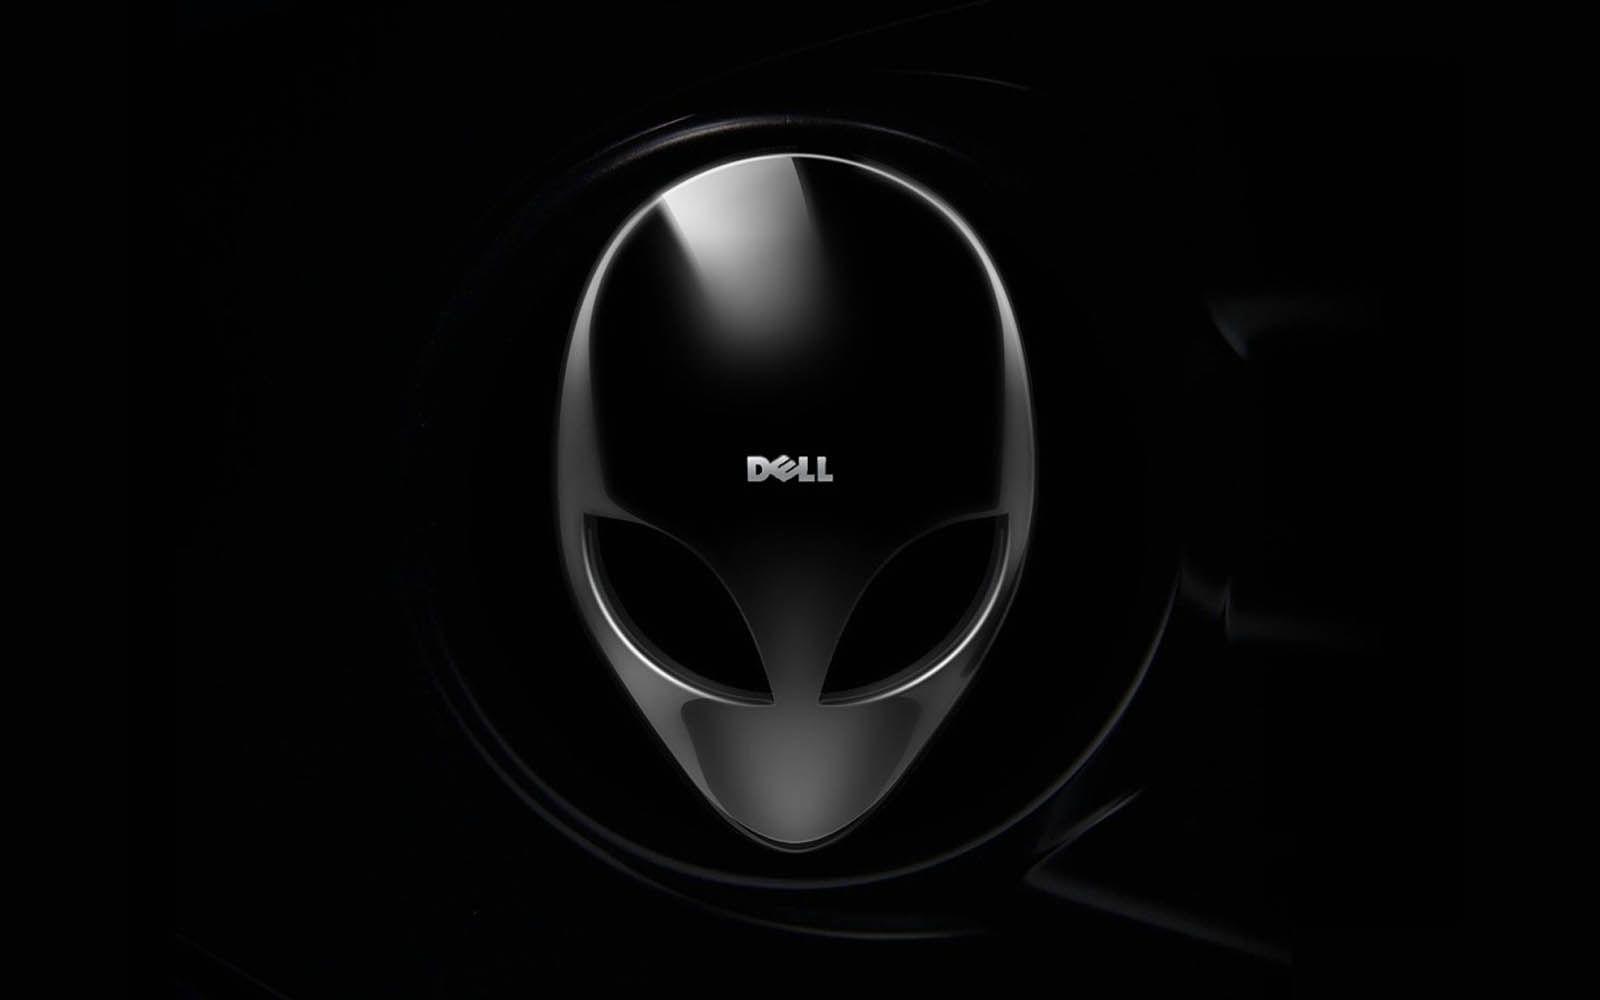 Top Ranked Dell Wallpaper, PC AMZ HD Quality